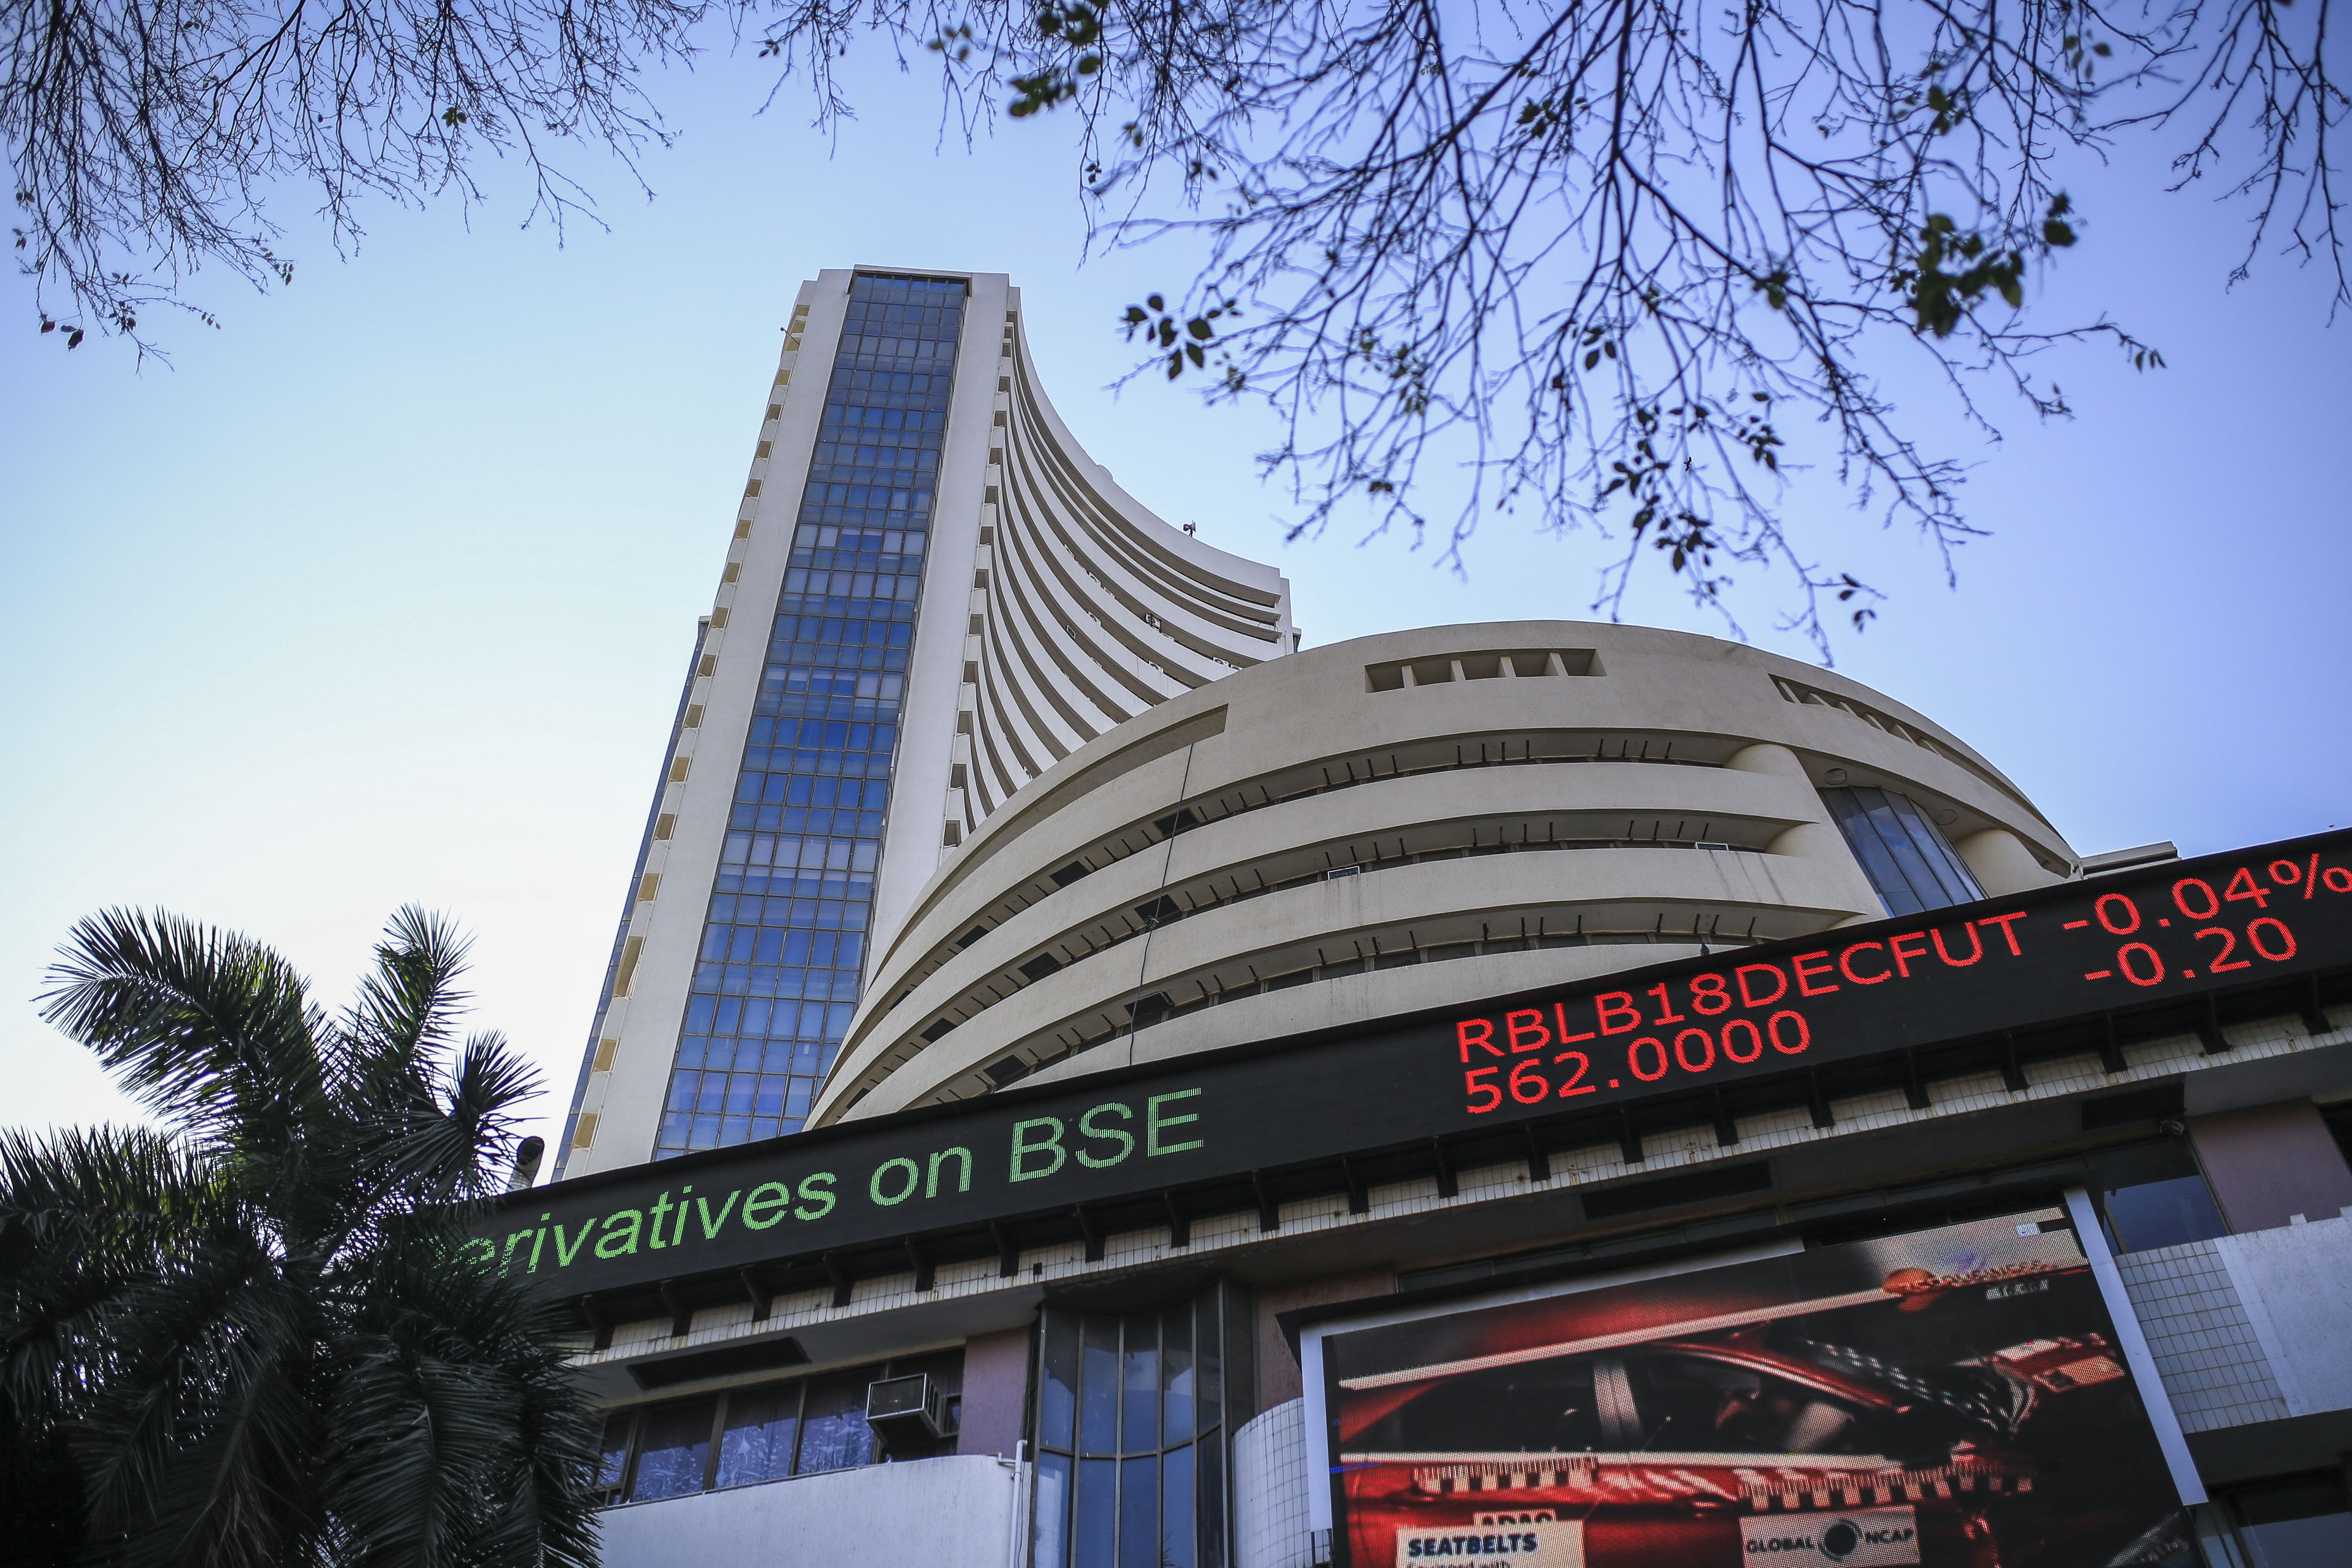 Sensex falls 492.46 points to 59,215.62 in early trade